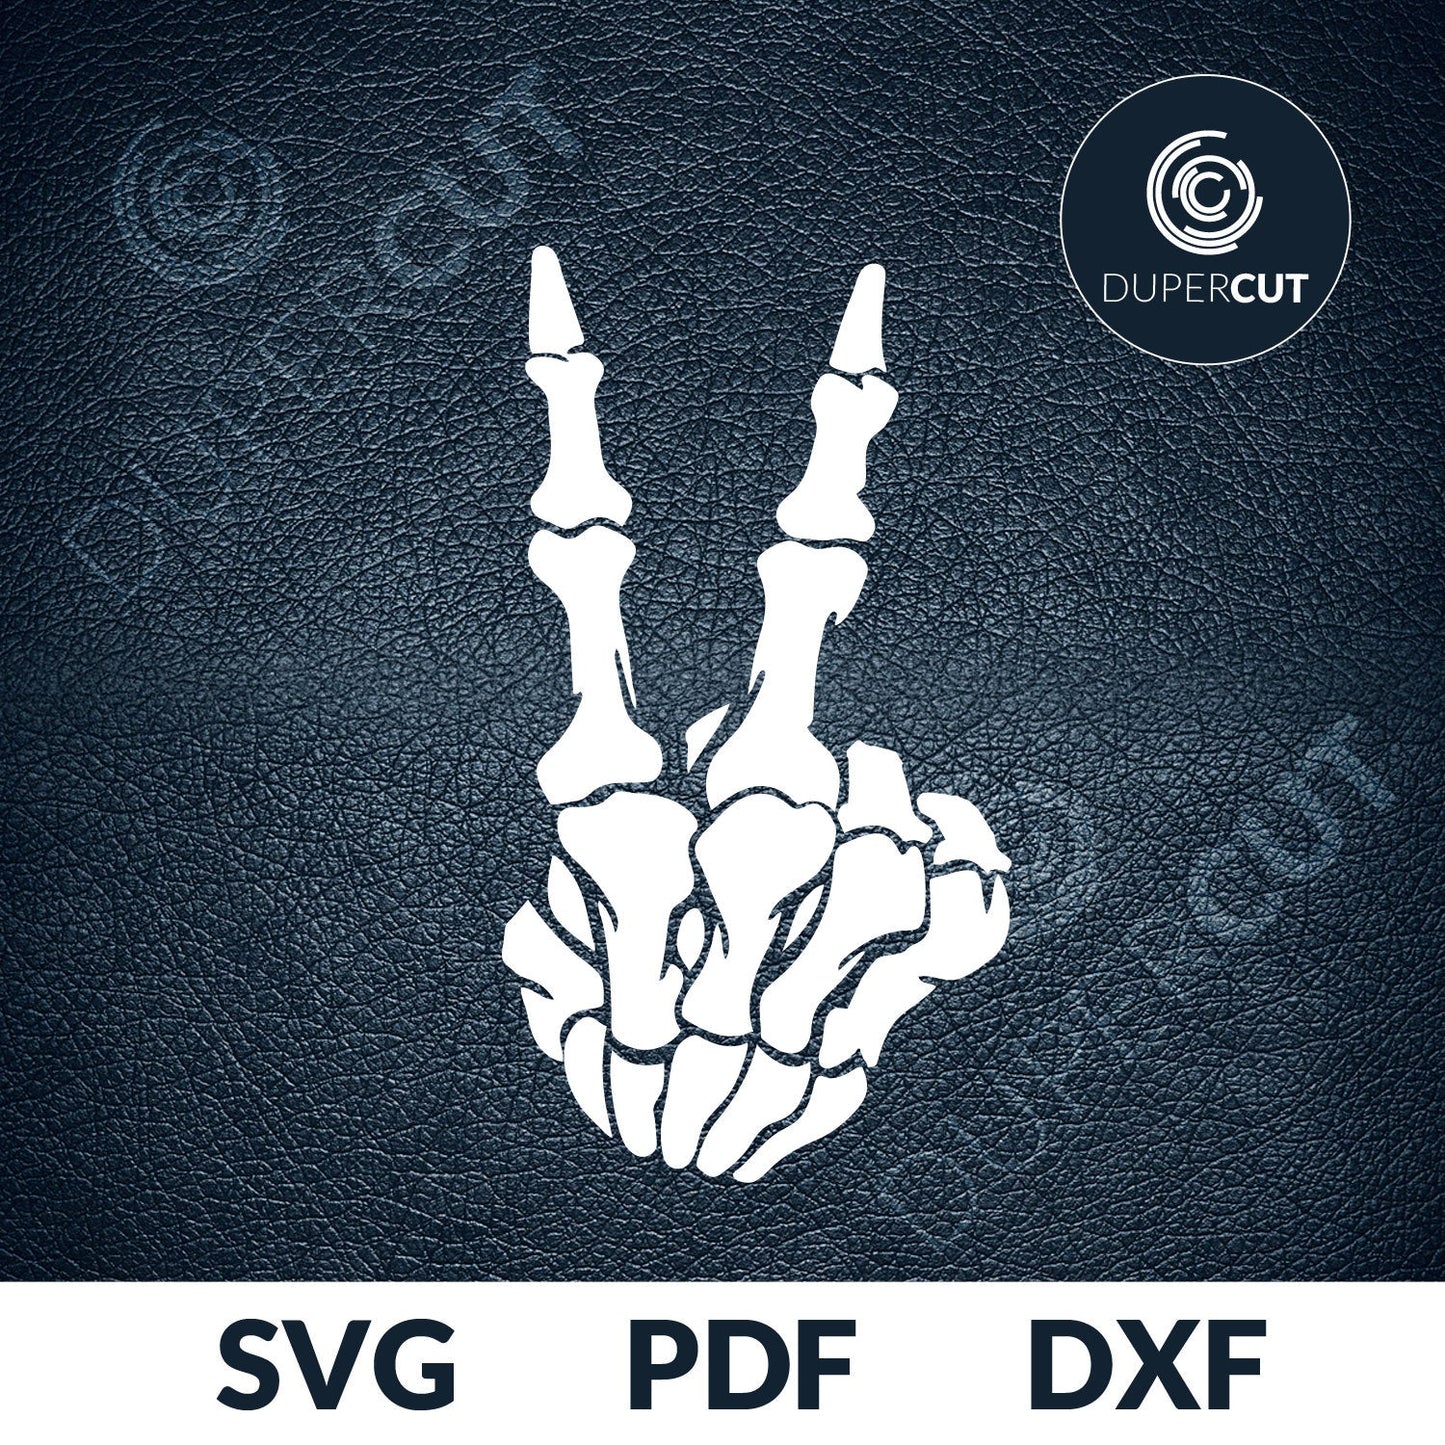 Skeleton hand peace sign stencil. SVG PNG DXF cutting files for Cricut, Silhouette, Glowforge, print on demand, sublimation templates